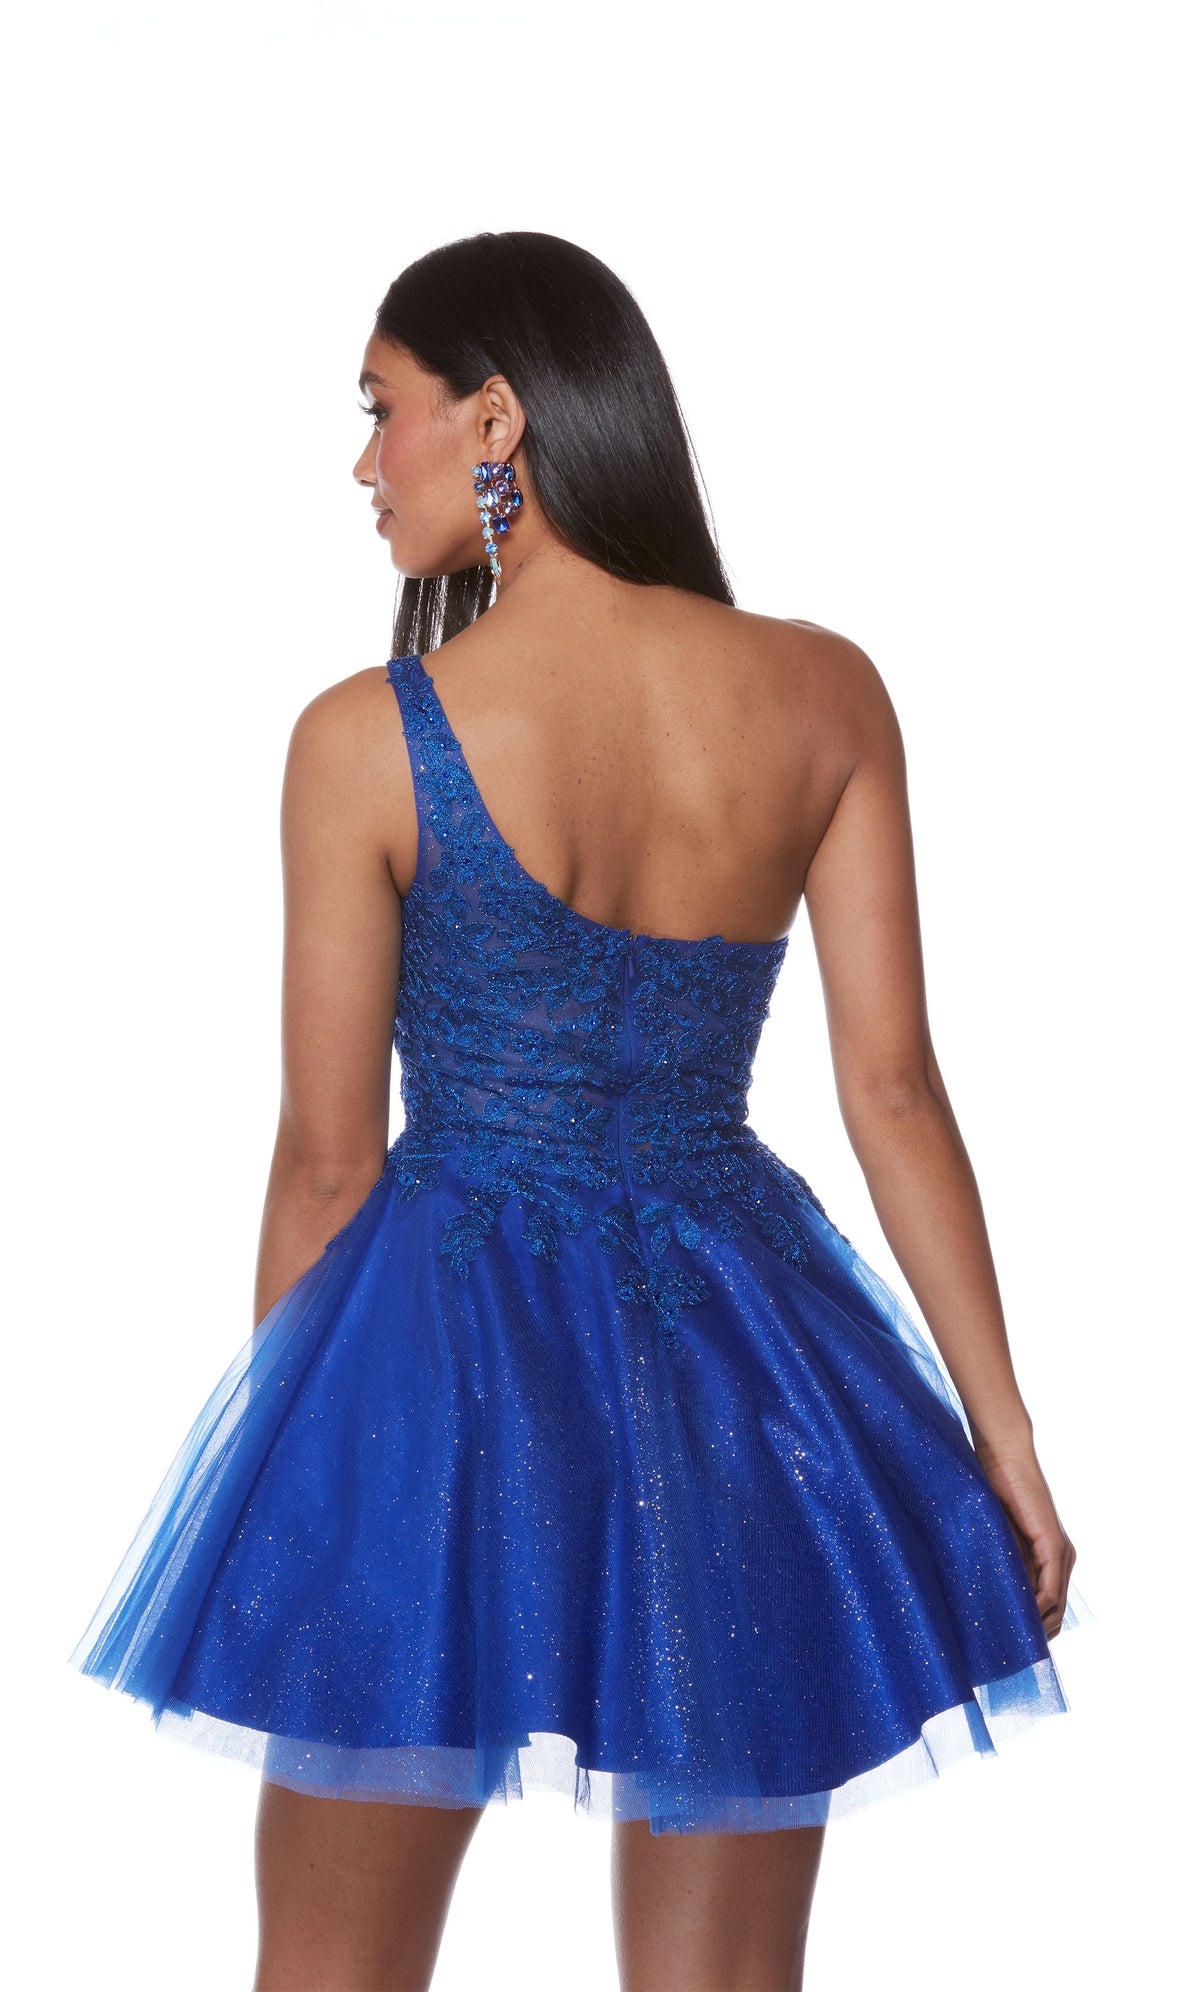 A royal blue, one-shoulder short formal dress with a delicate lace bodice and a flared glitter tulle skirt for the perfect touch of sparkle.